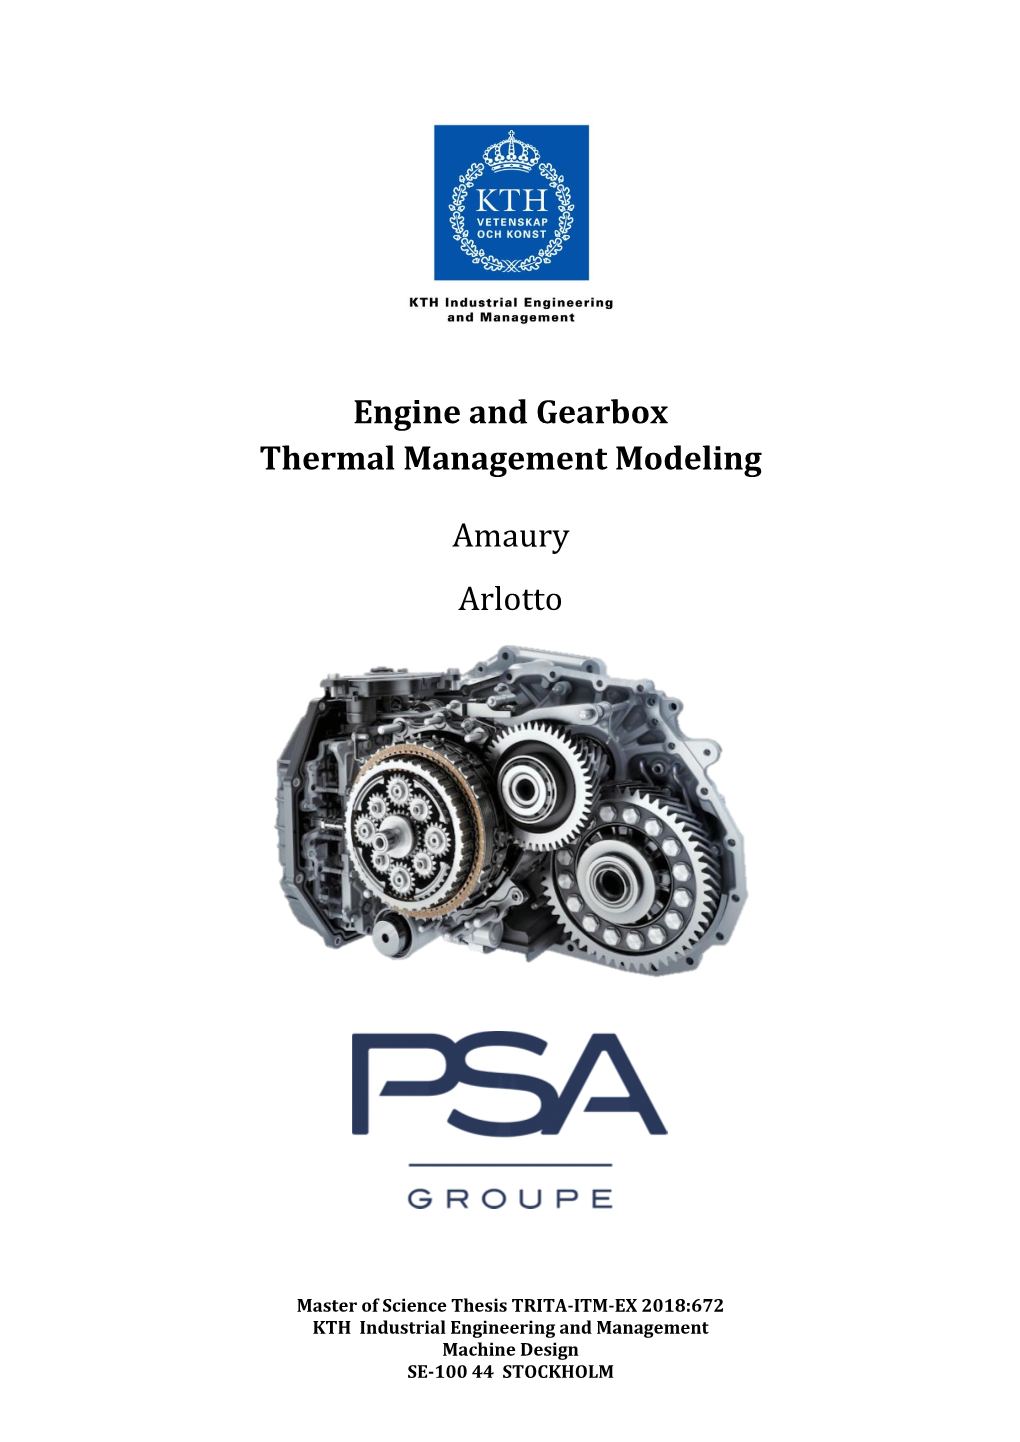 Engine and Gearbox Thermal Management Modeling Amaury